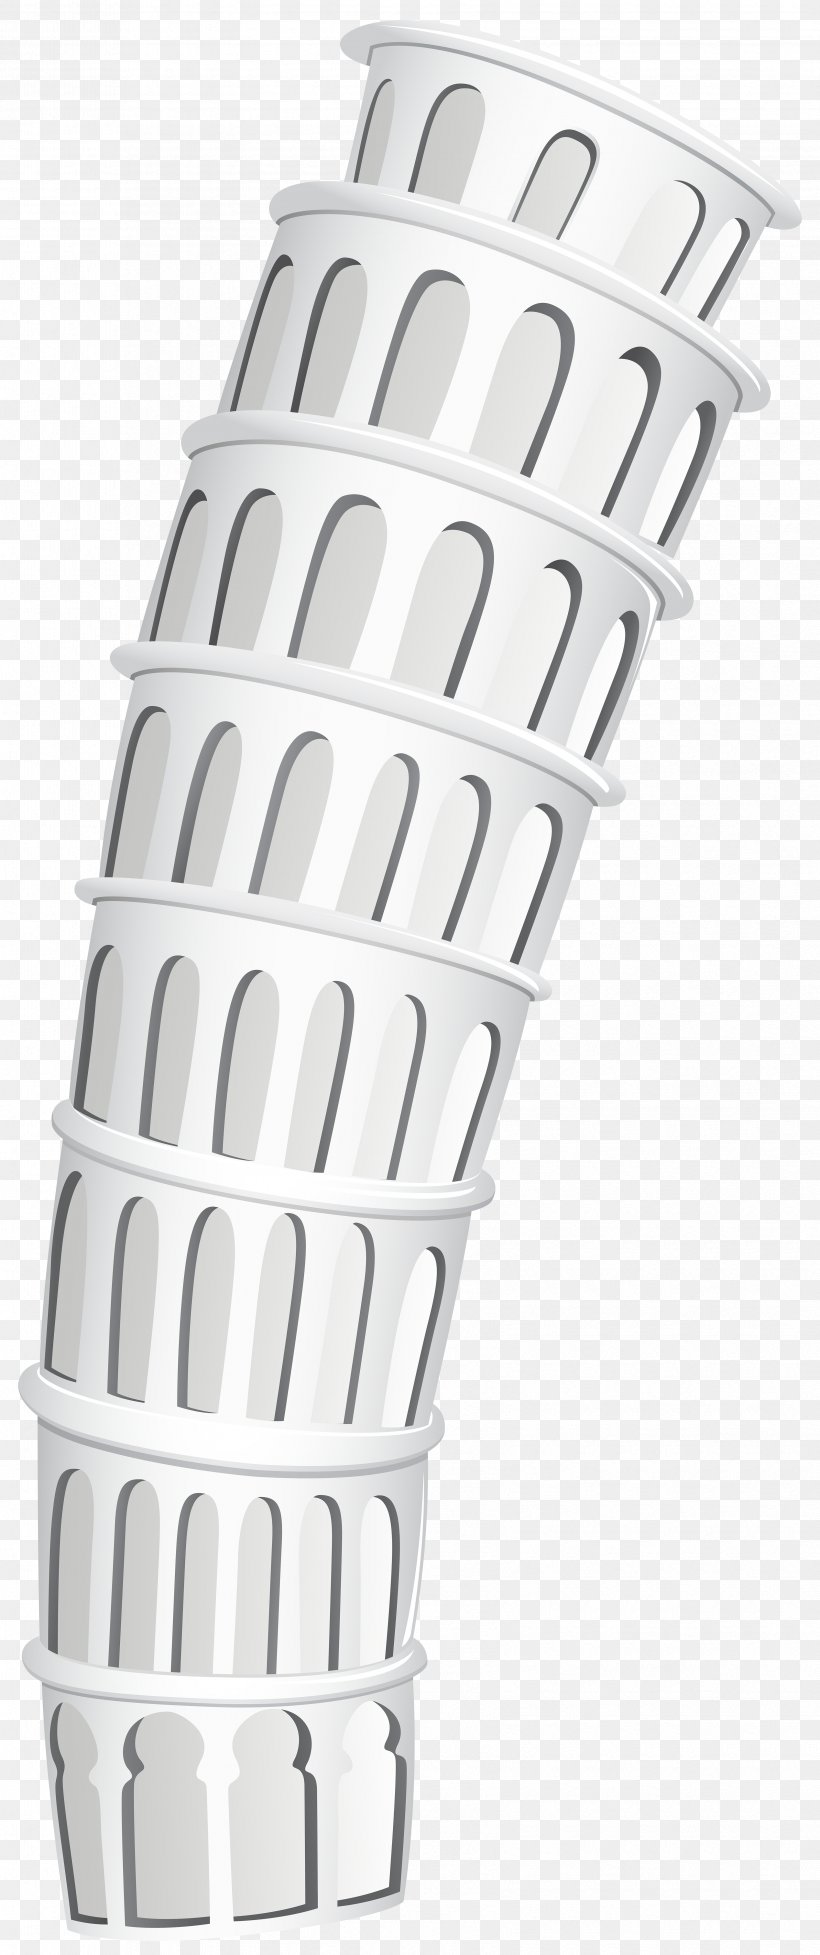 Leaning Tower Of Pisa Royalty-free, PNG, 3355x8000px, Leaning Tower Of Pisa, Pisa, Province Of Pisa, Royalty Payment, Royaltyfree Download Free